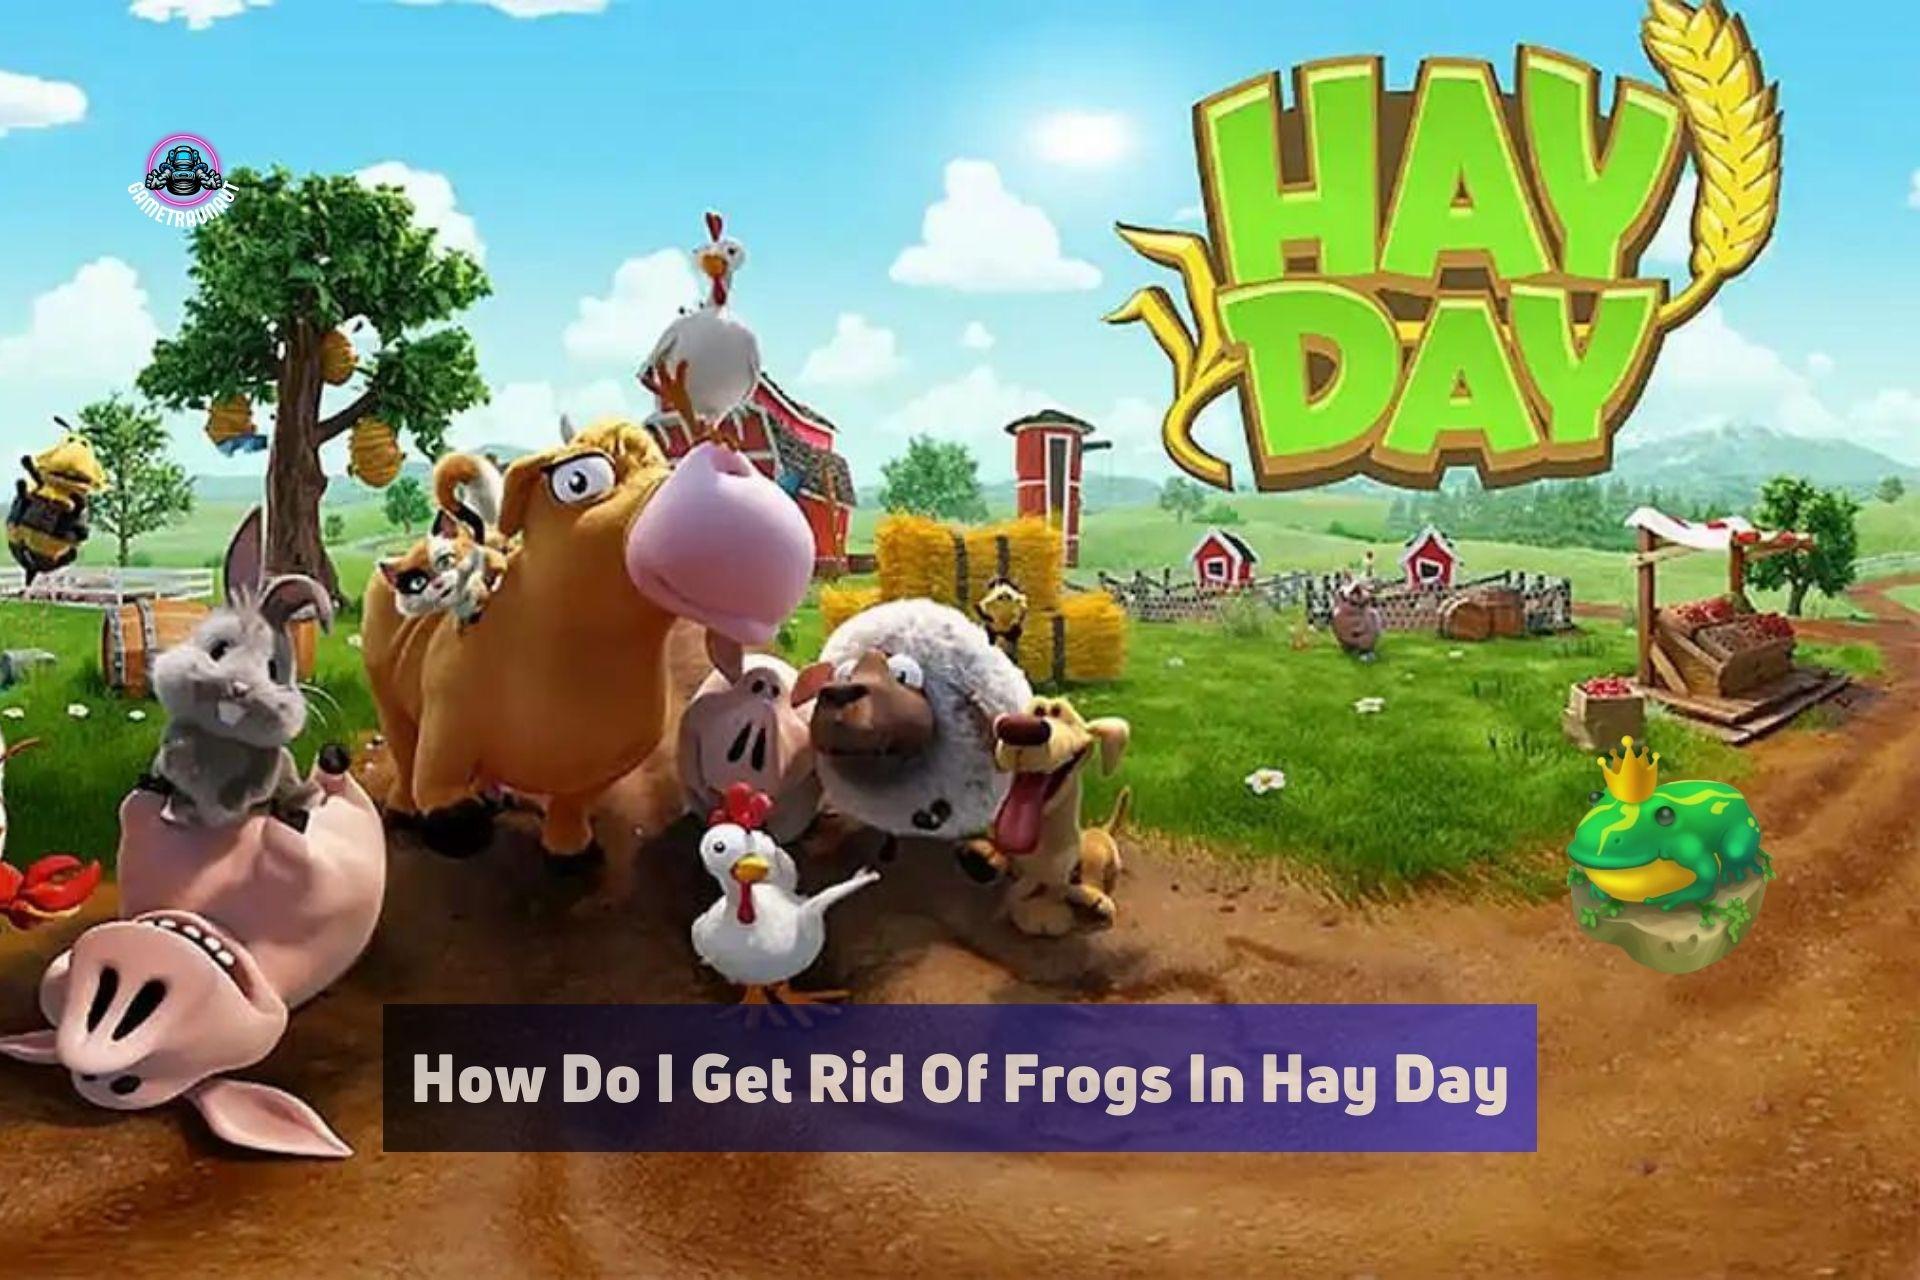 How do I get rid of frogs in Hay day?